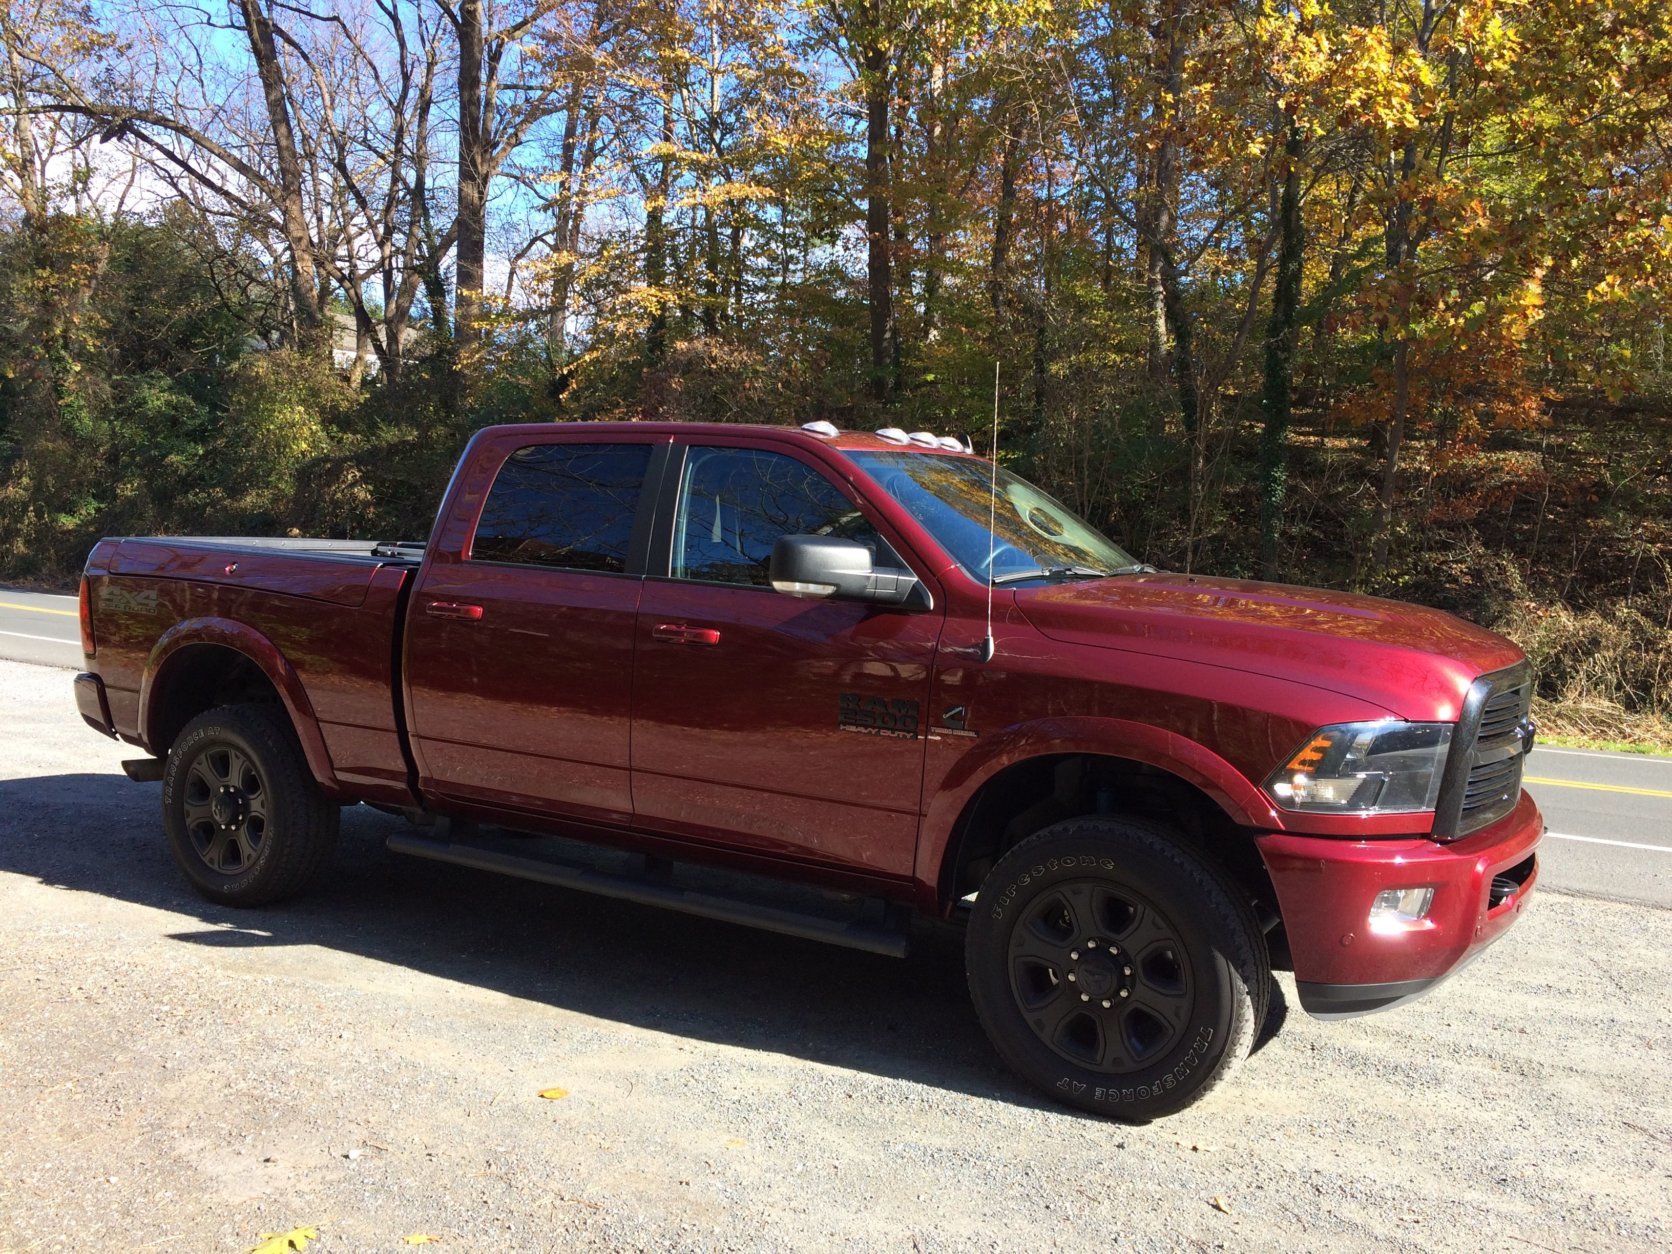 Driving the Ram 2500 takes a bit of getting used to. The truck is large and long with a wide body. (WTOP/Mike Parris)